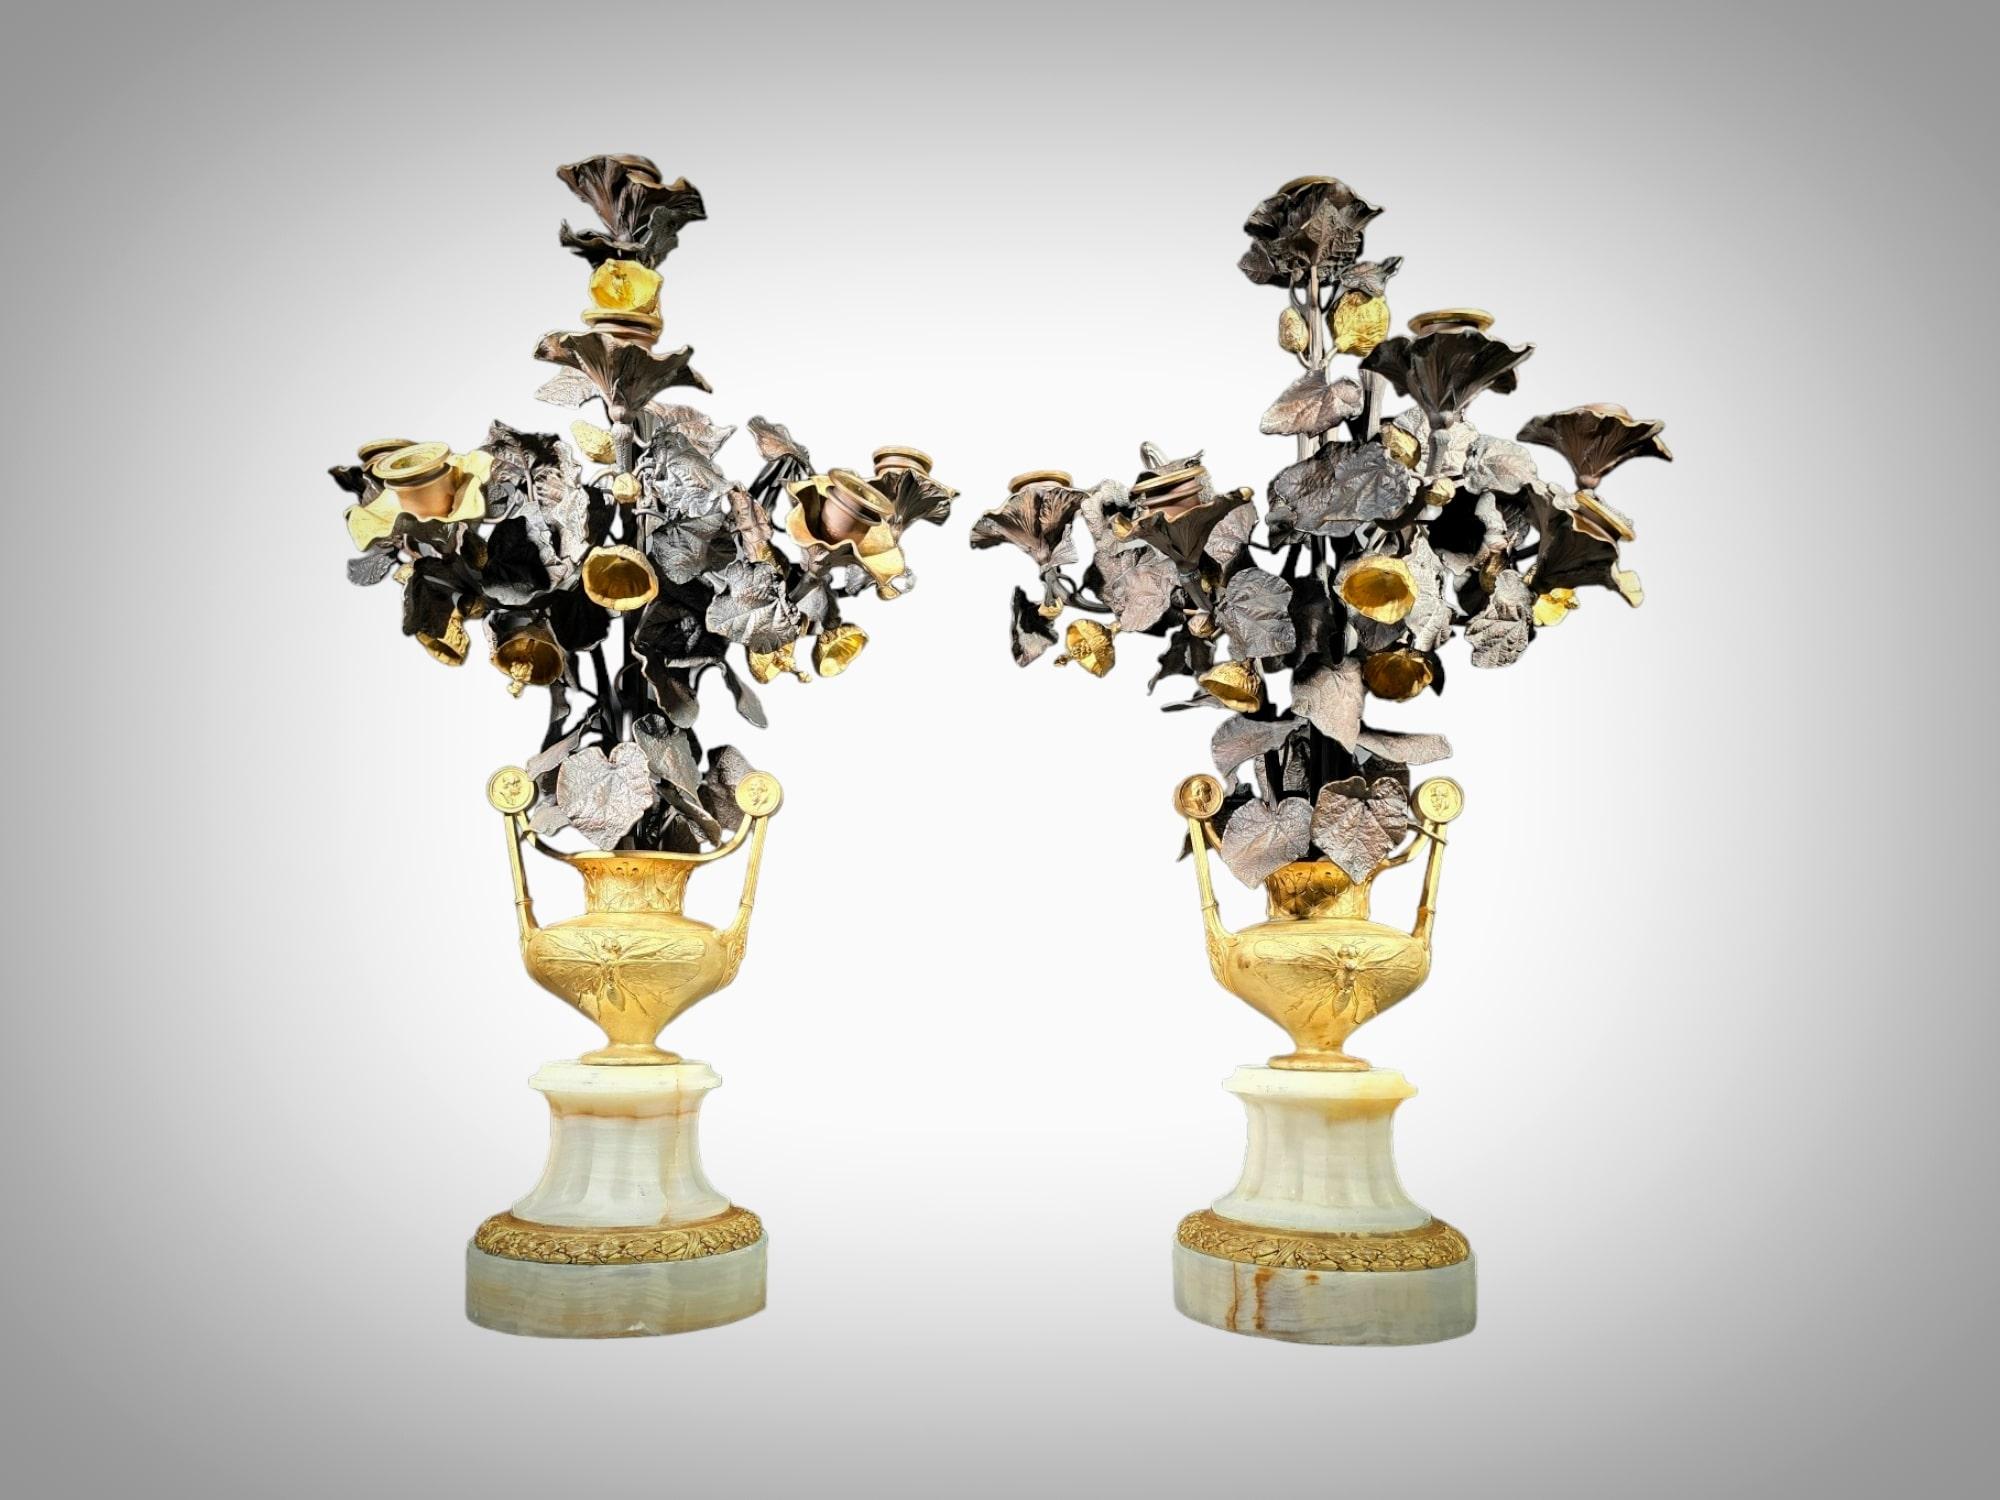 Stunning Gilt Bronze Vases with Flowers, Possibly Italian from the 19th Century For Sale 11